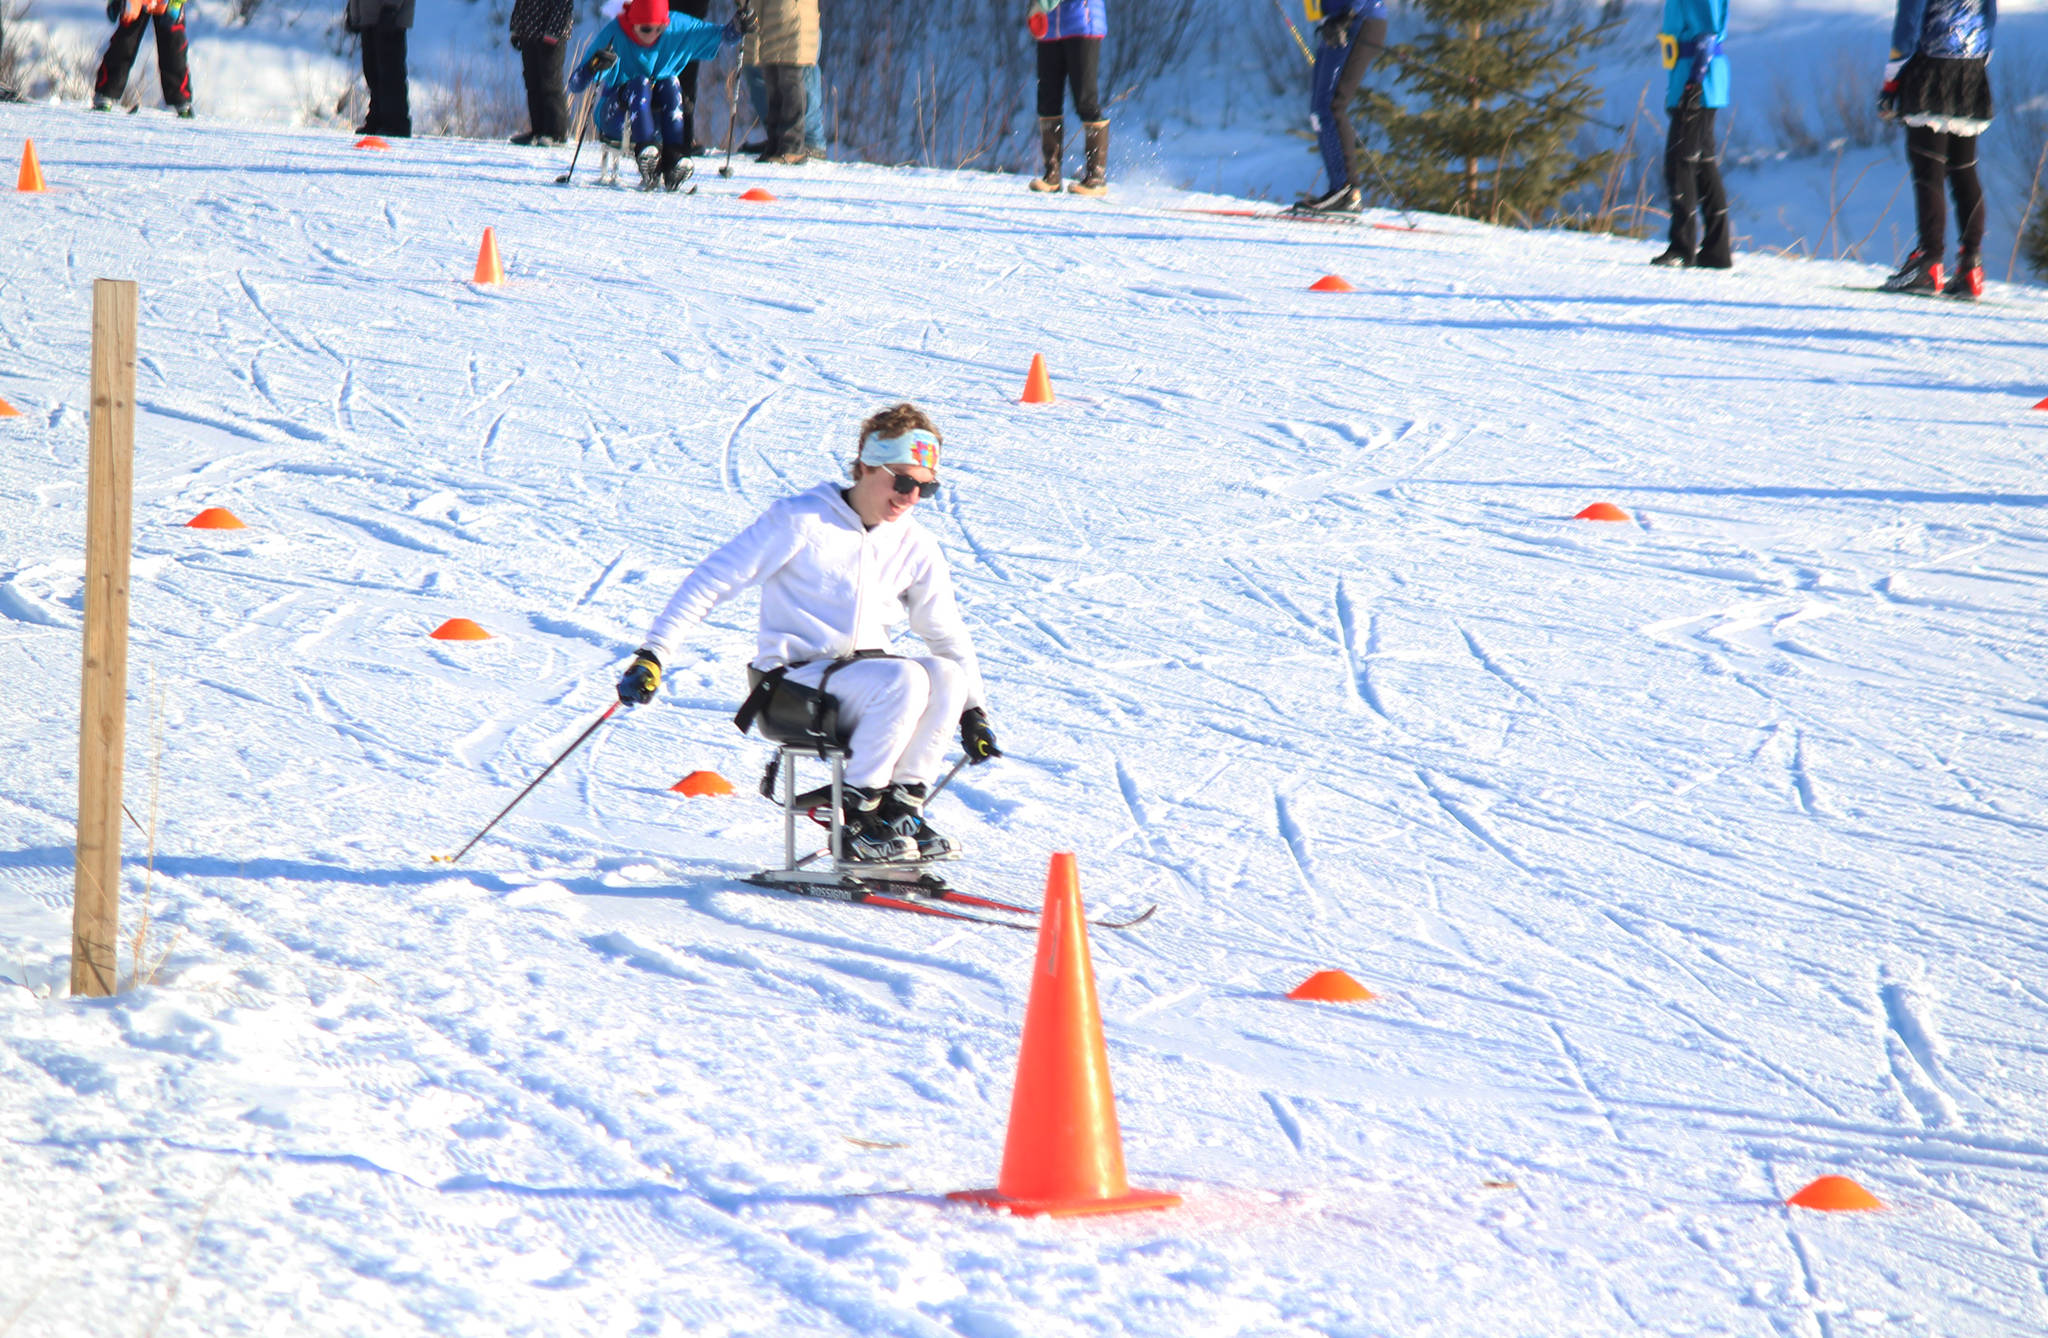 Homer’s Jacob Davis maneuvers around orange cones during the first leg of the adaptive sit ski relay race Saturday, Feb. 3, 2018 at the Lookout Mountain Ski Trails. Teams from Homer, Kenai and Soldotna raced teams of four (two standing skiers and two sit skiers) in the relay after the individual 5-kilometer skate races. (Photo by Megan Pacer/Homer News)